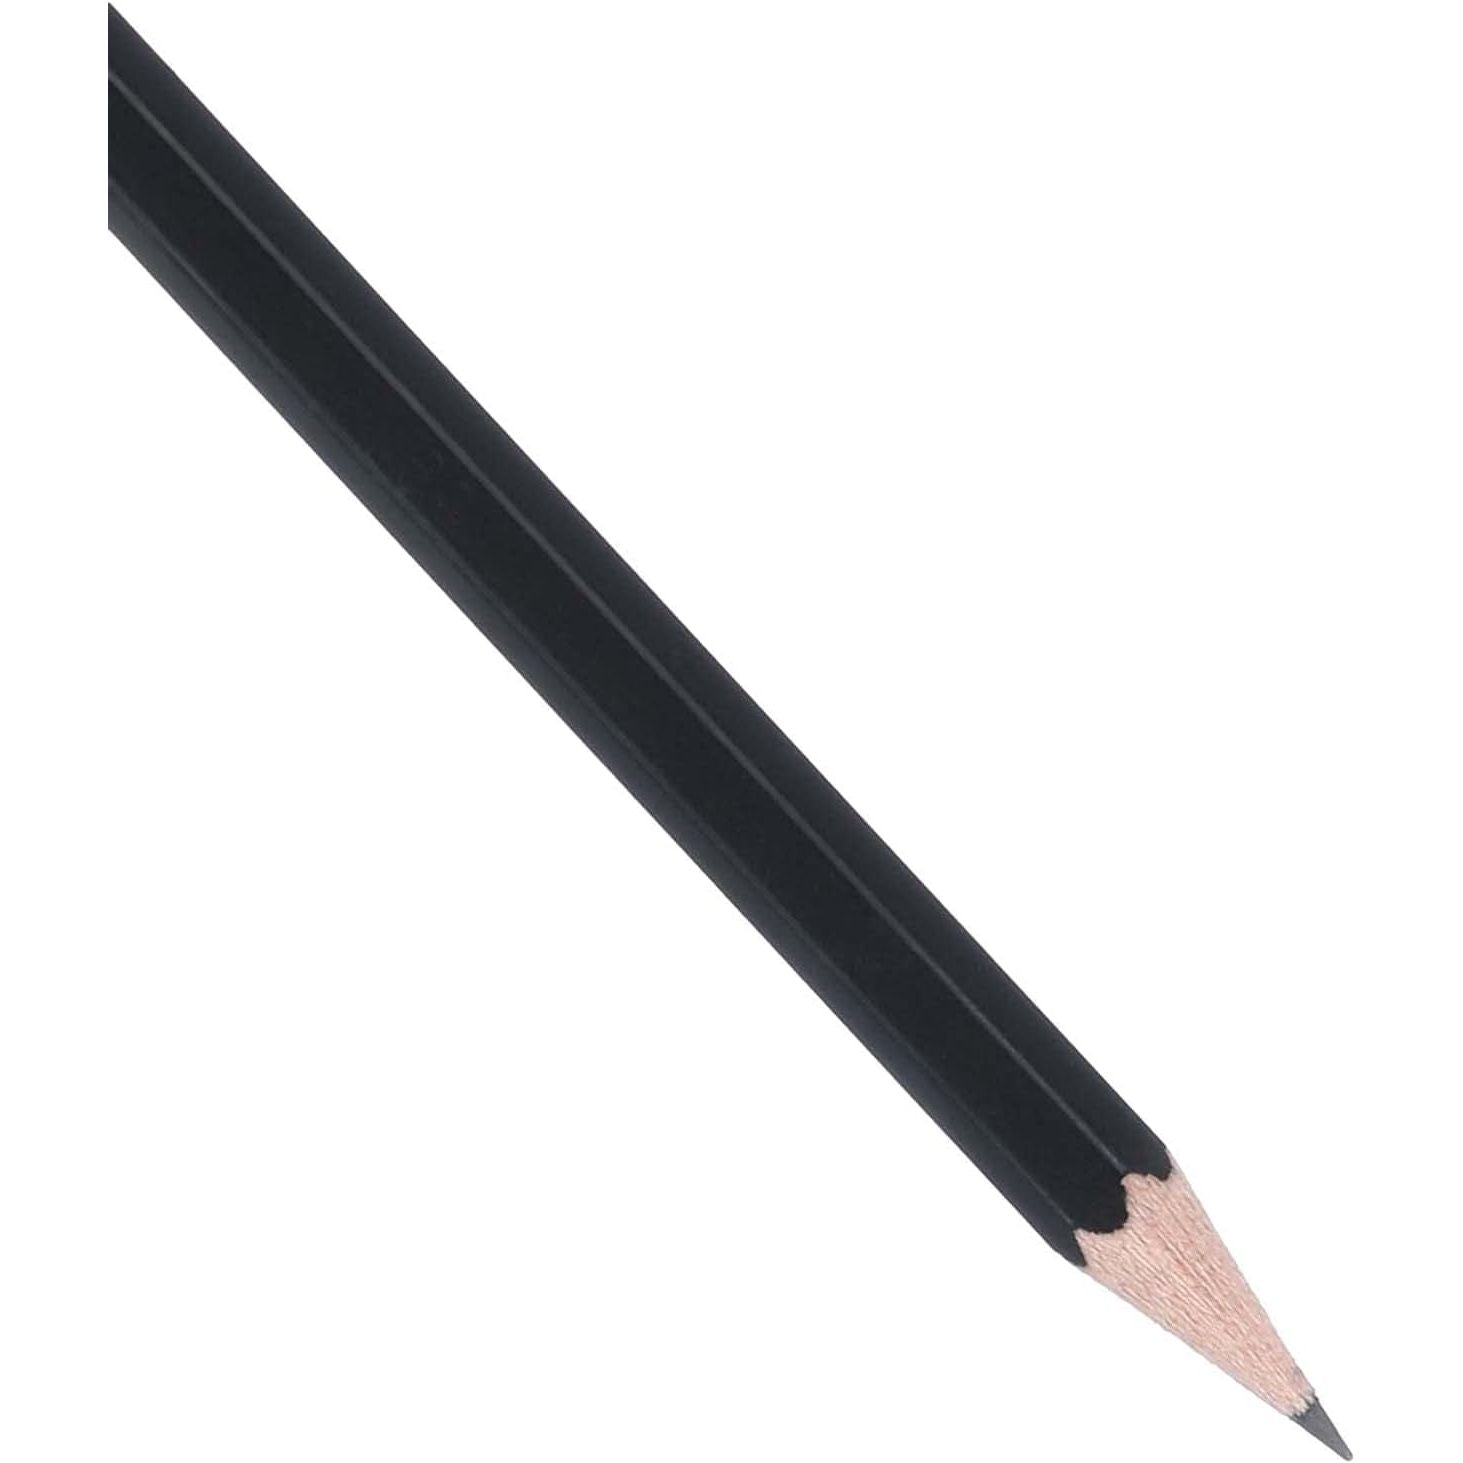 Faber-Castell Blacklead Pencils 2B with Erasers Tip 2112 (Pack of 12)